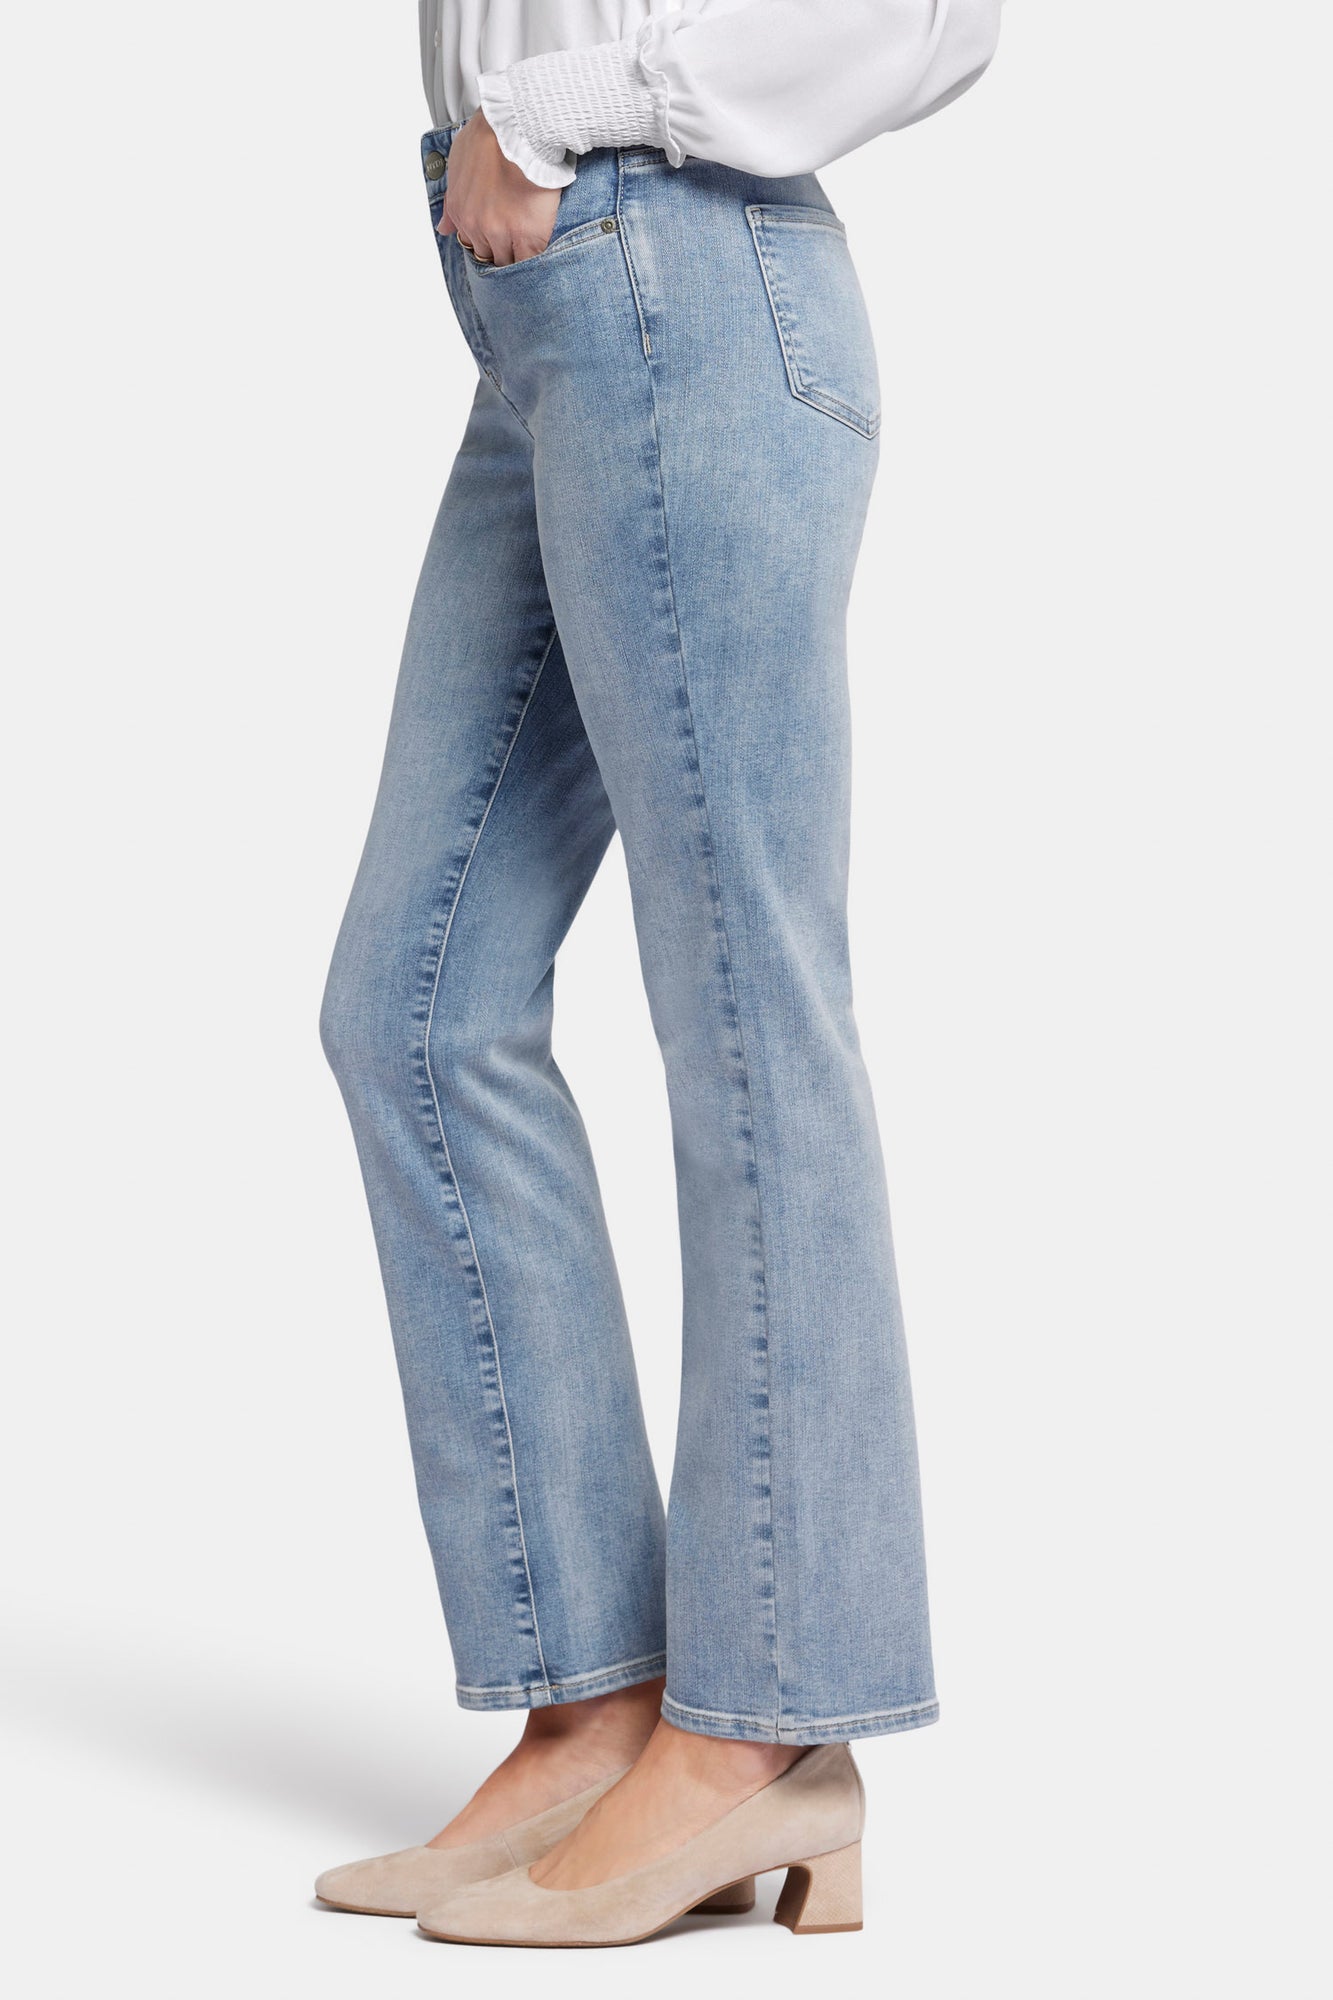 NYDJ Ellison Straight Jeans With High Rise - Haley